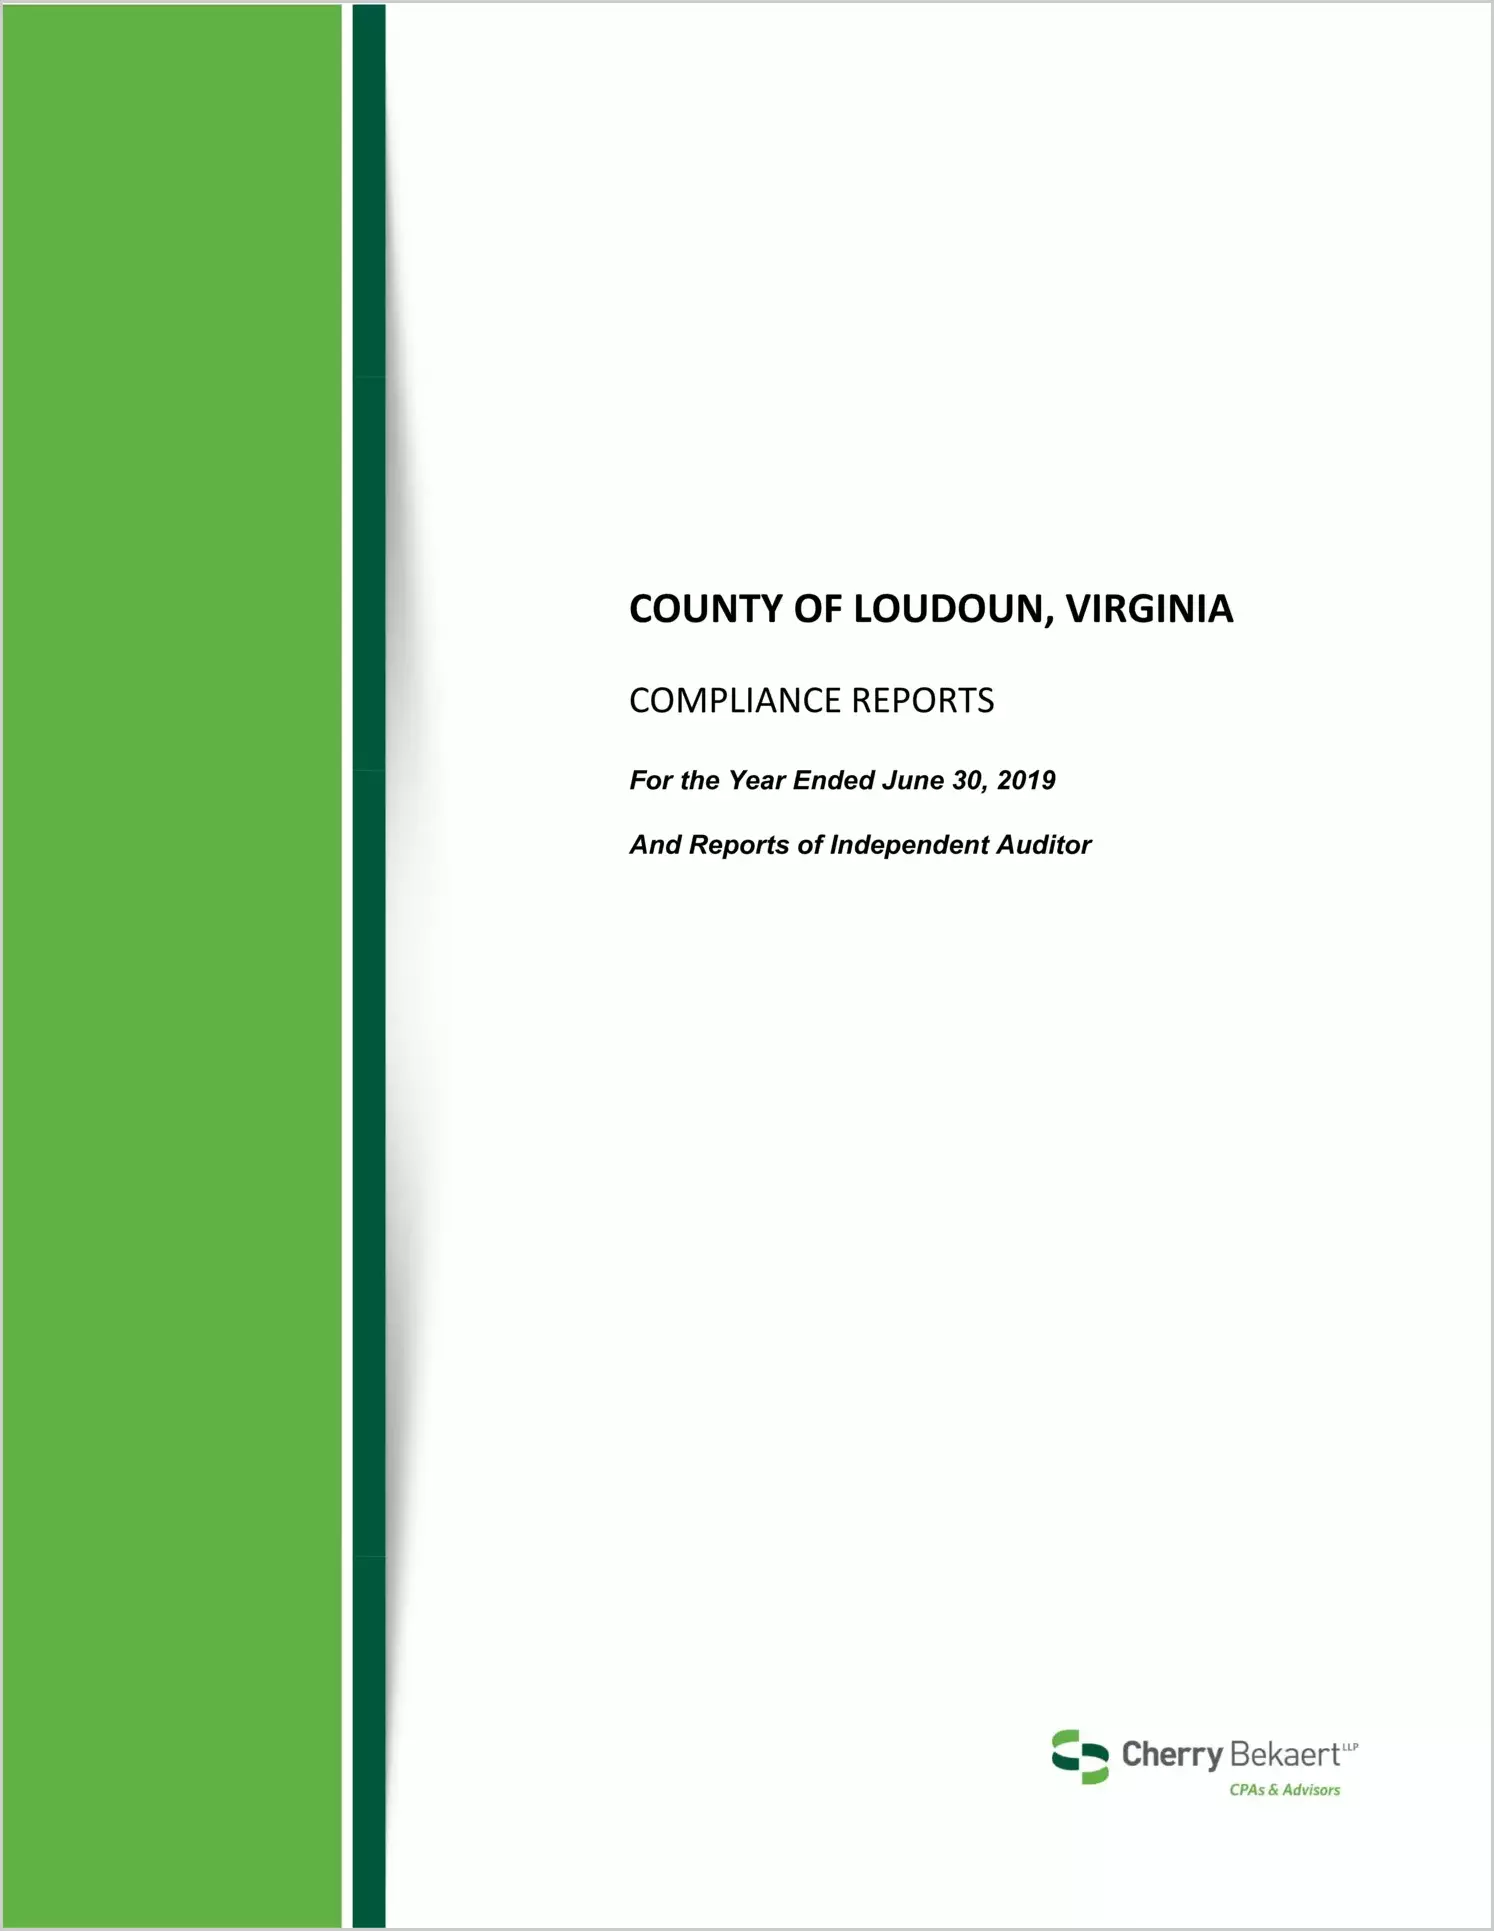 2019 Internal Control and Compliance Report for County of Loudoun